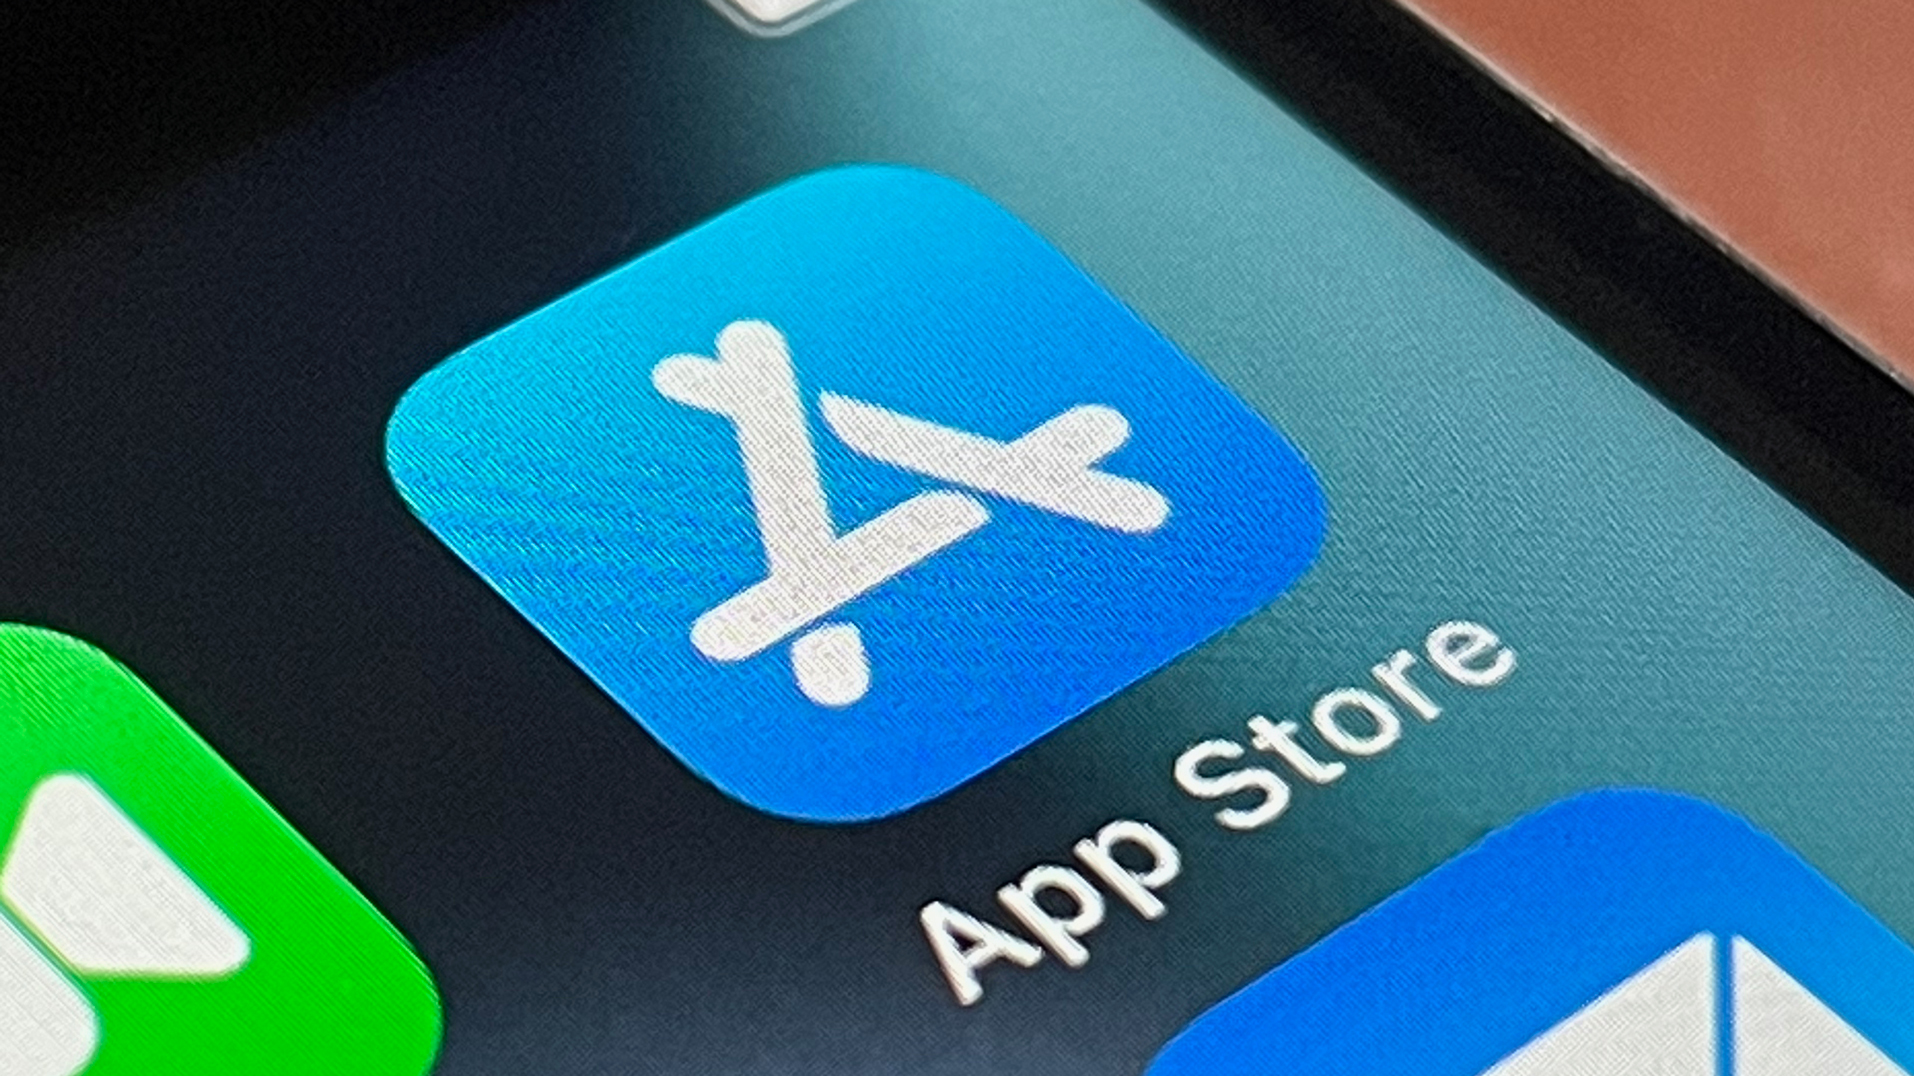 App Store icon on iPhone screen